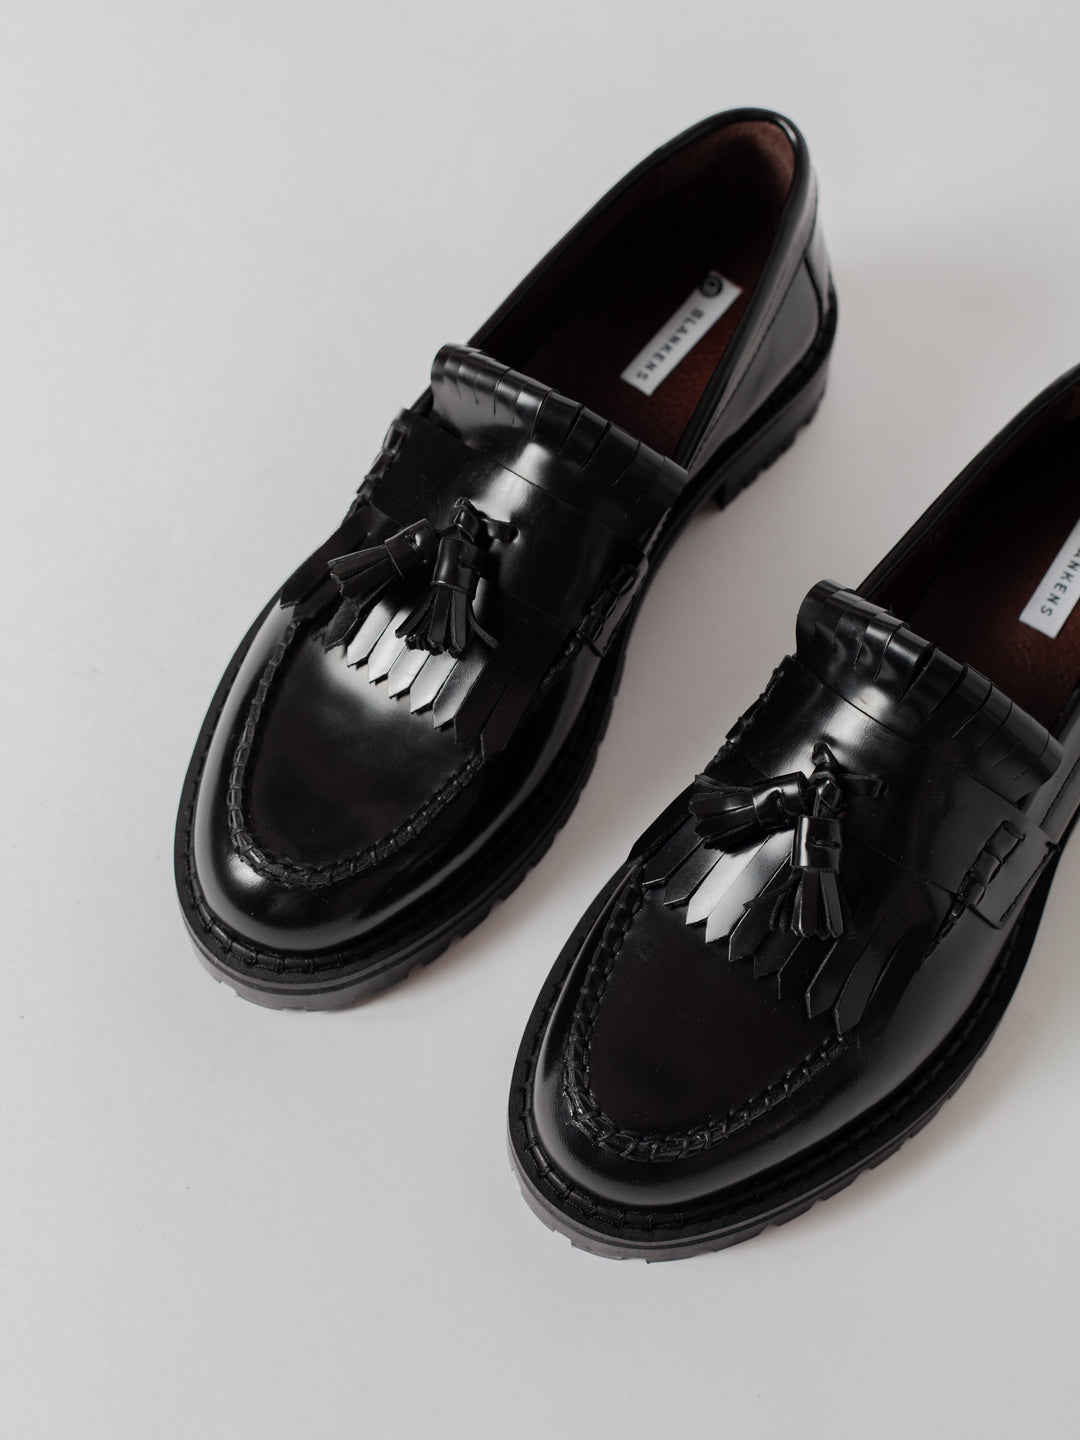 Blankens The Amal black loafer in leather with leather tassel in black. Blankens The Amal black loafer in leather with leather tassel in black. European leather sole in a rubber mix